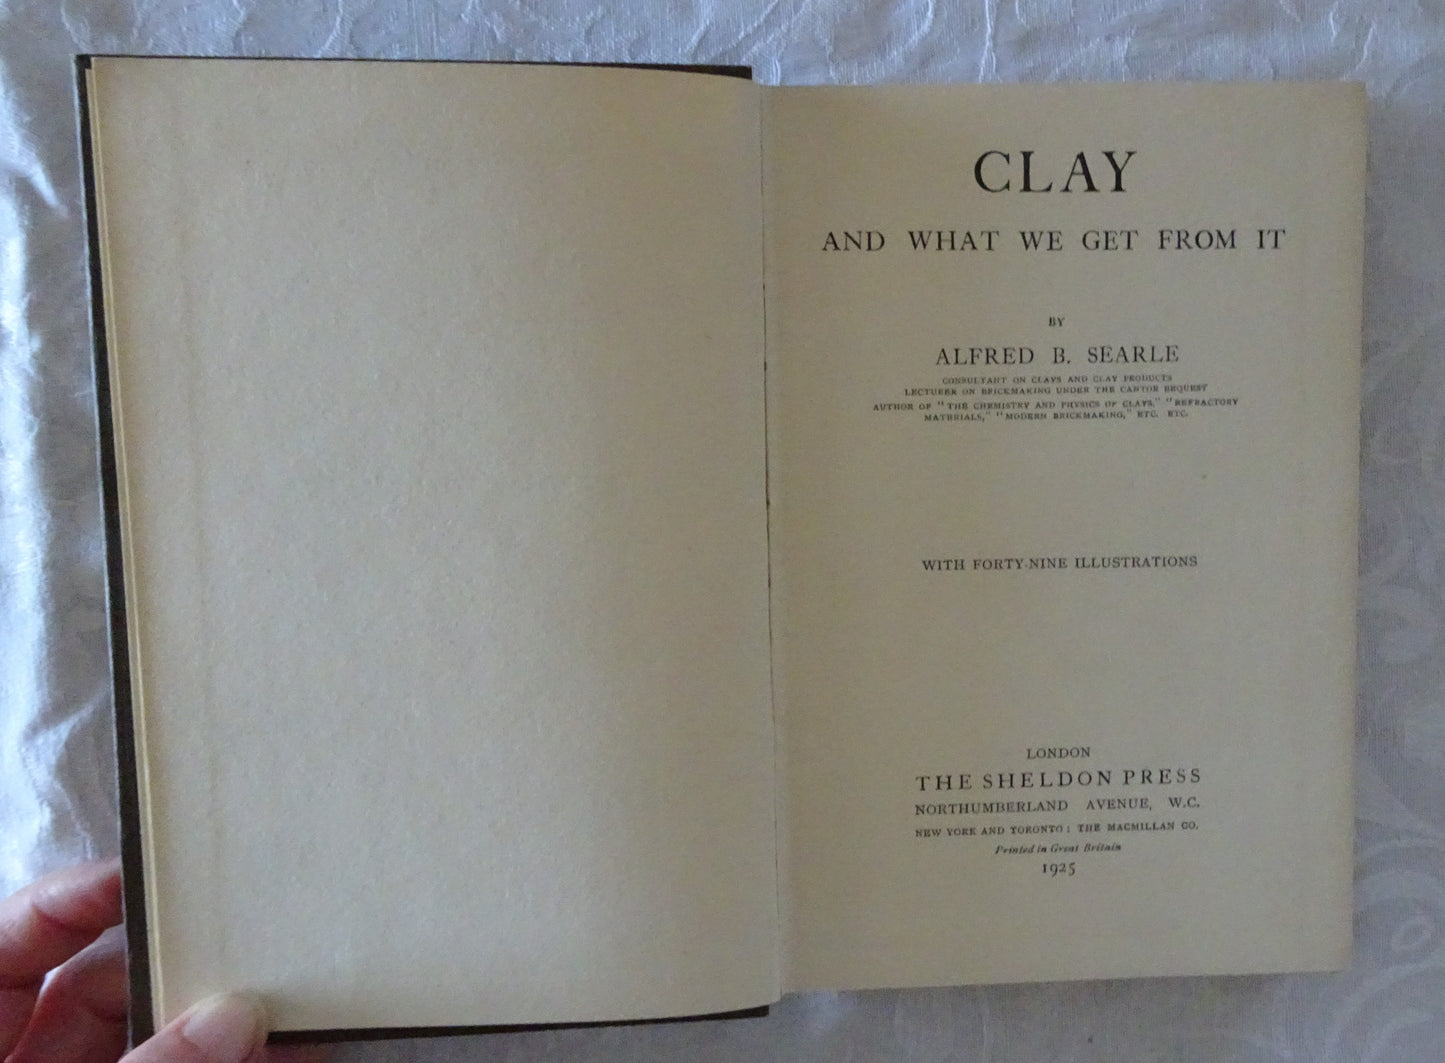 Clay and What We Get From It by Alfred B. Searle